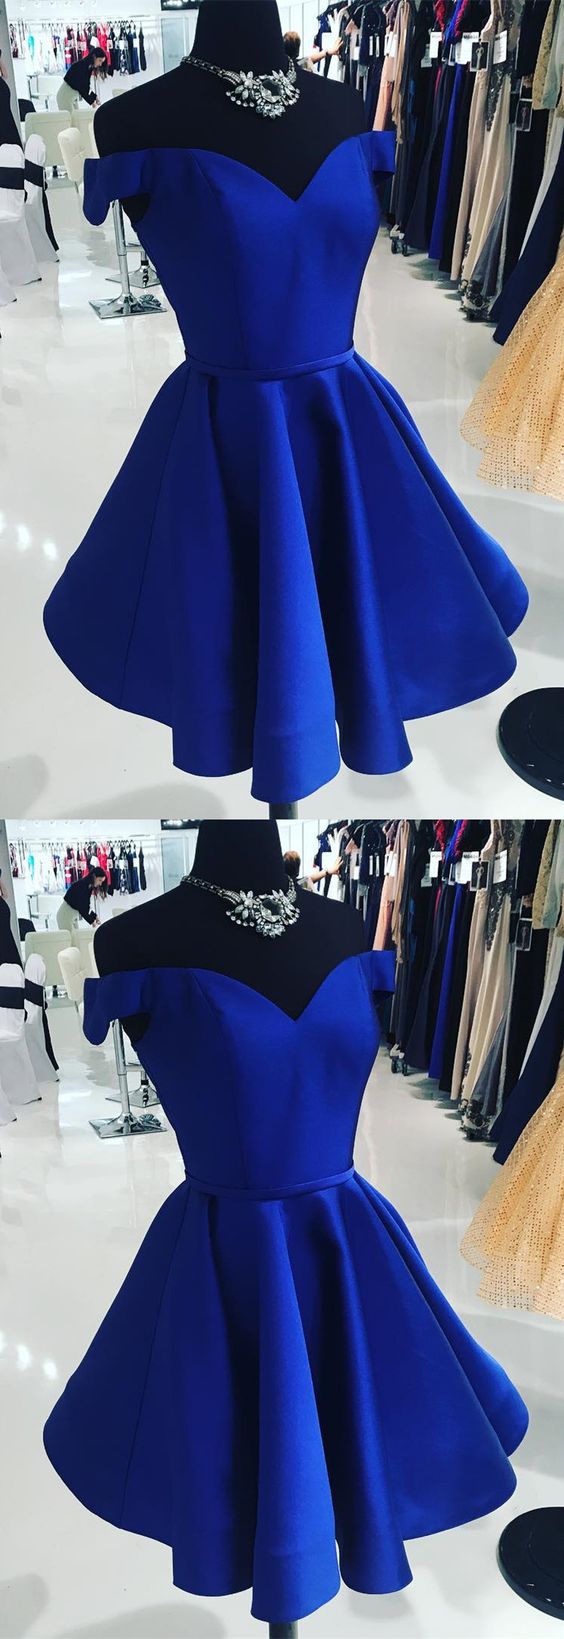 Short Royal Blue Prom Dress, Homecoming Dresses, Graduation School Party Gown, Winter Formal Dress